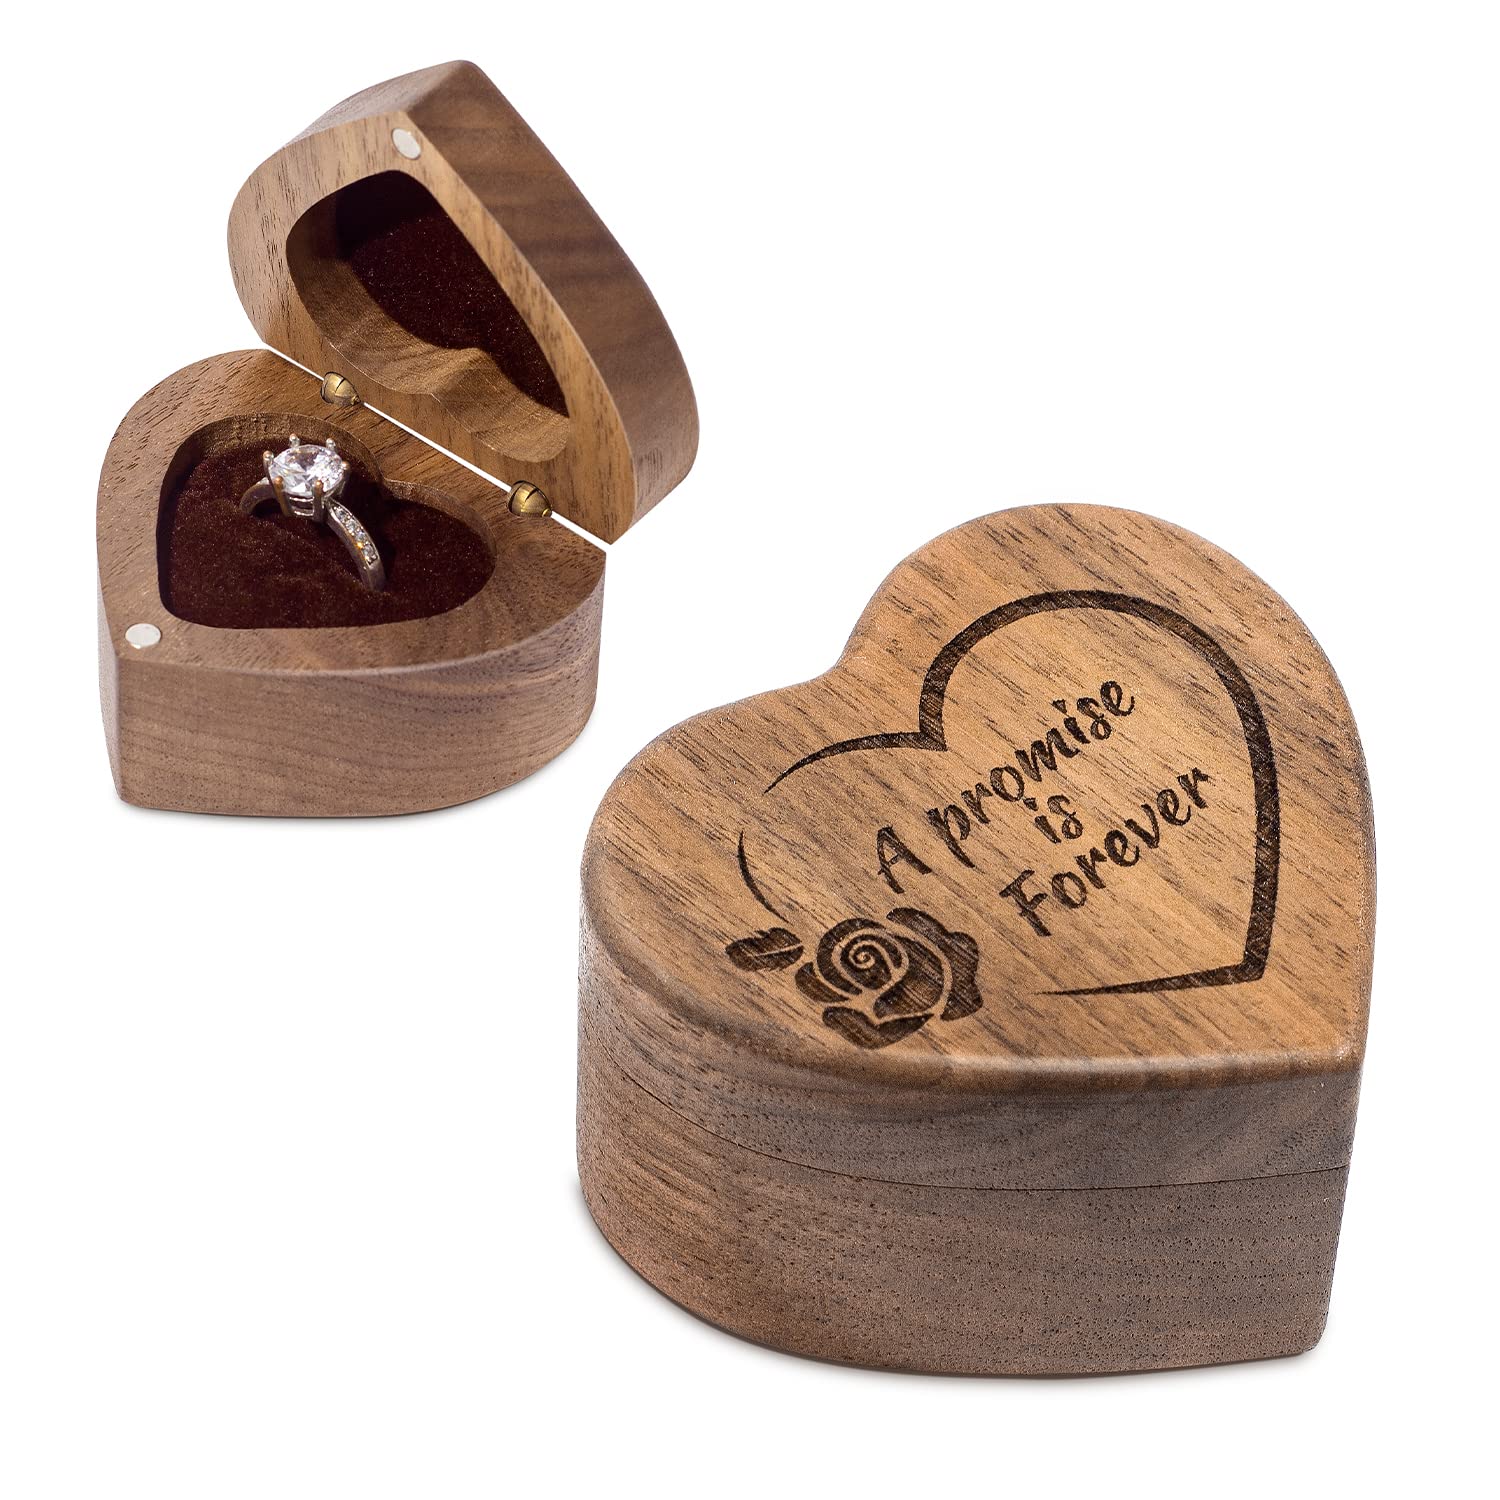 Heart Shaped Walnut Wood Ring Box Velvet Soft Interior Holder Jewelry Chest Organizer Earrings Coin Jewelry Wooden Presentation